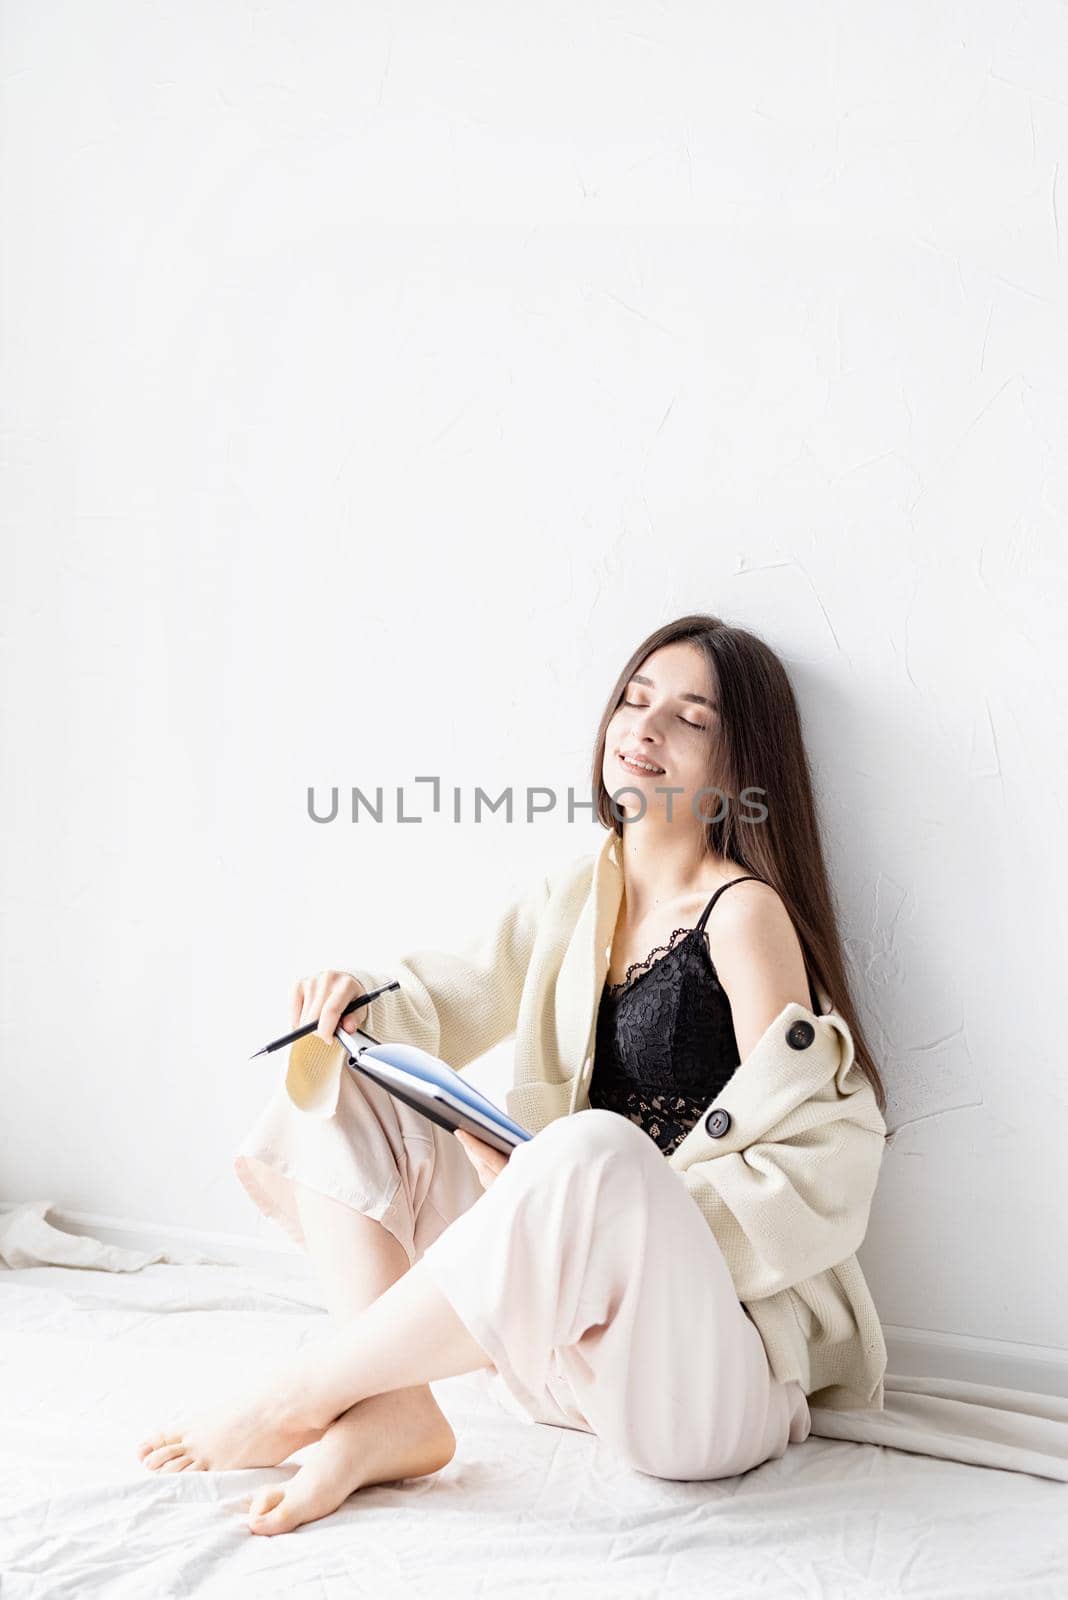 Beautiful sexy woman in comfy home clothes writing notes sitting on the floor, dreaming with eyes closed